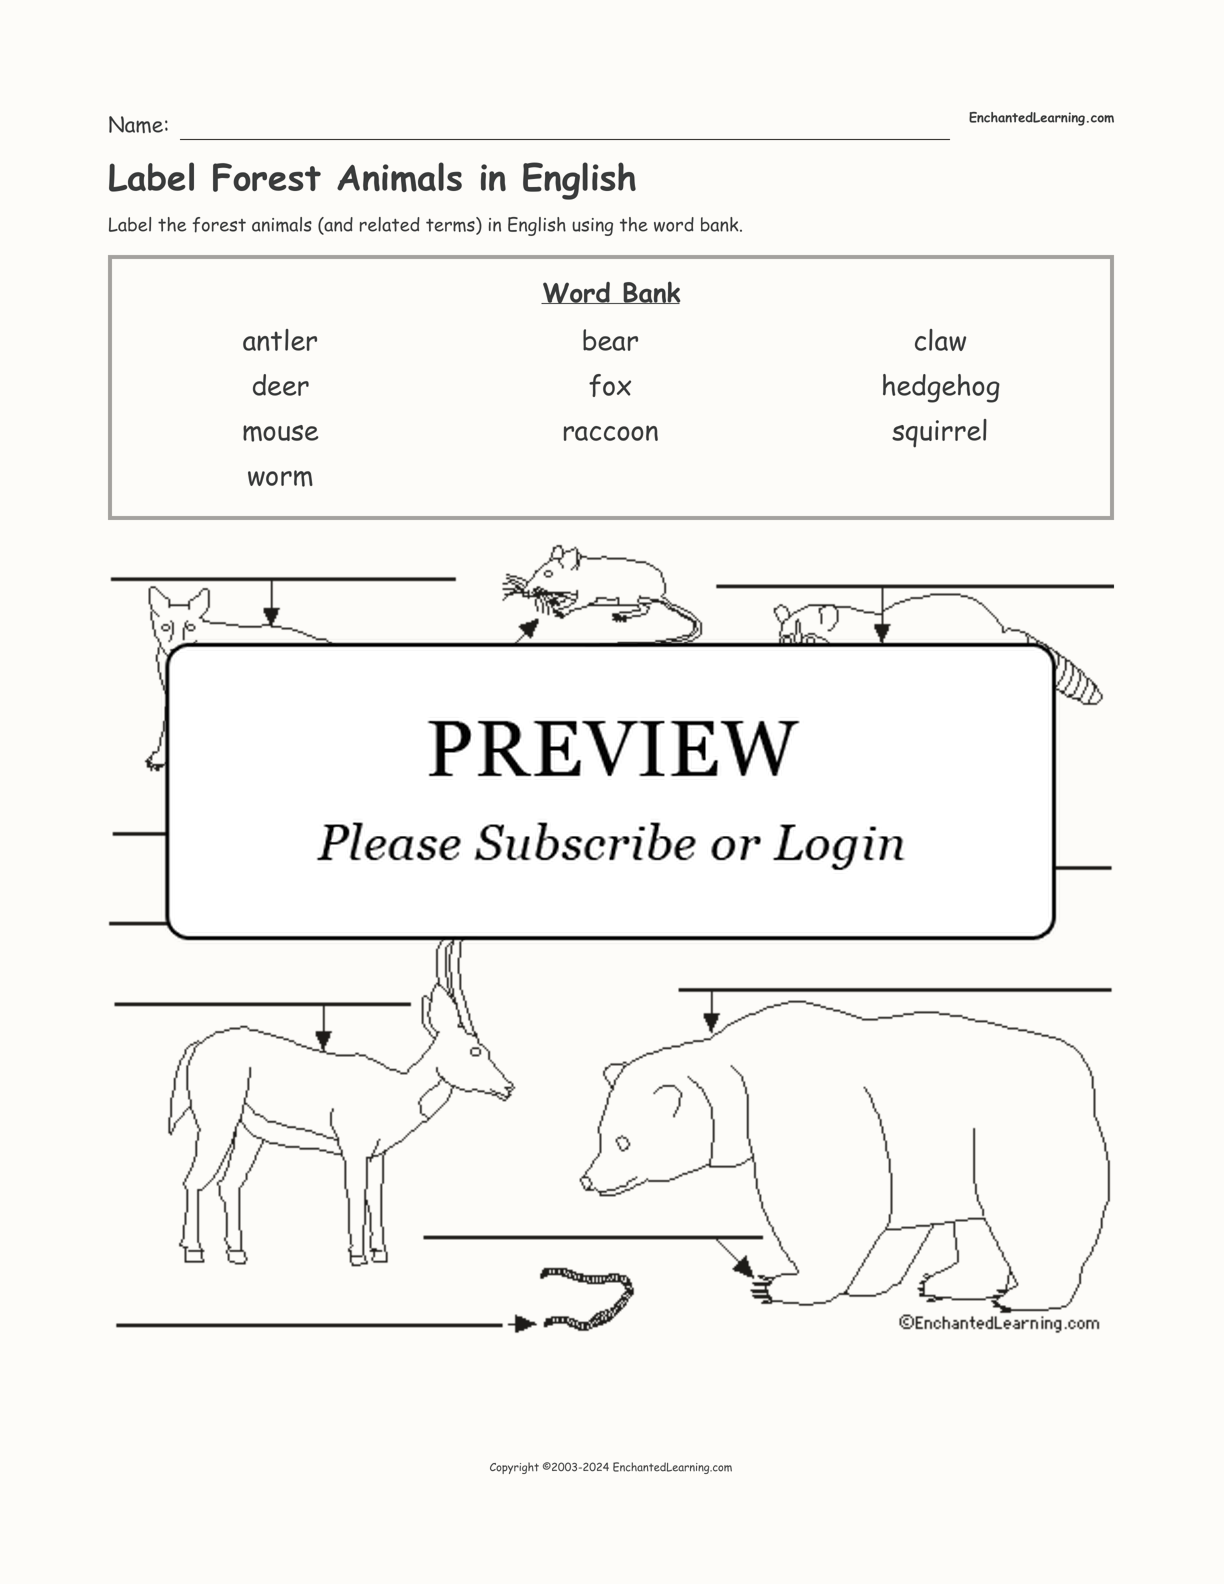 Label Forest Animals in English interactive worksheet page 1